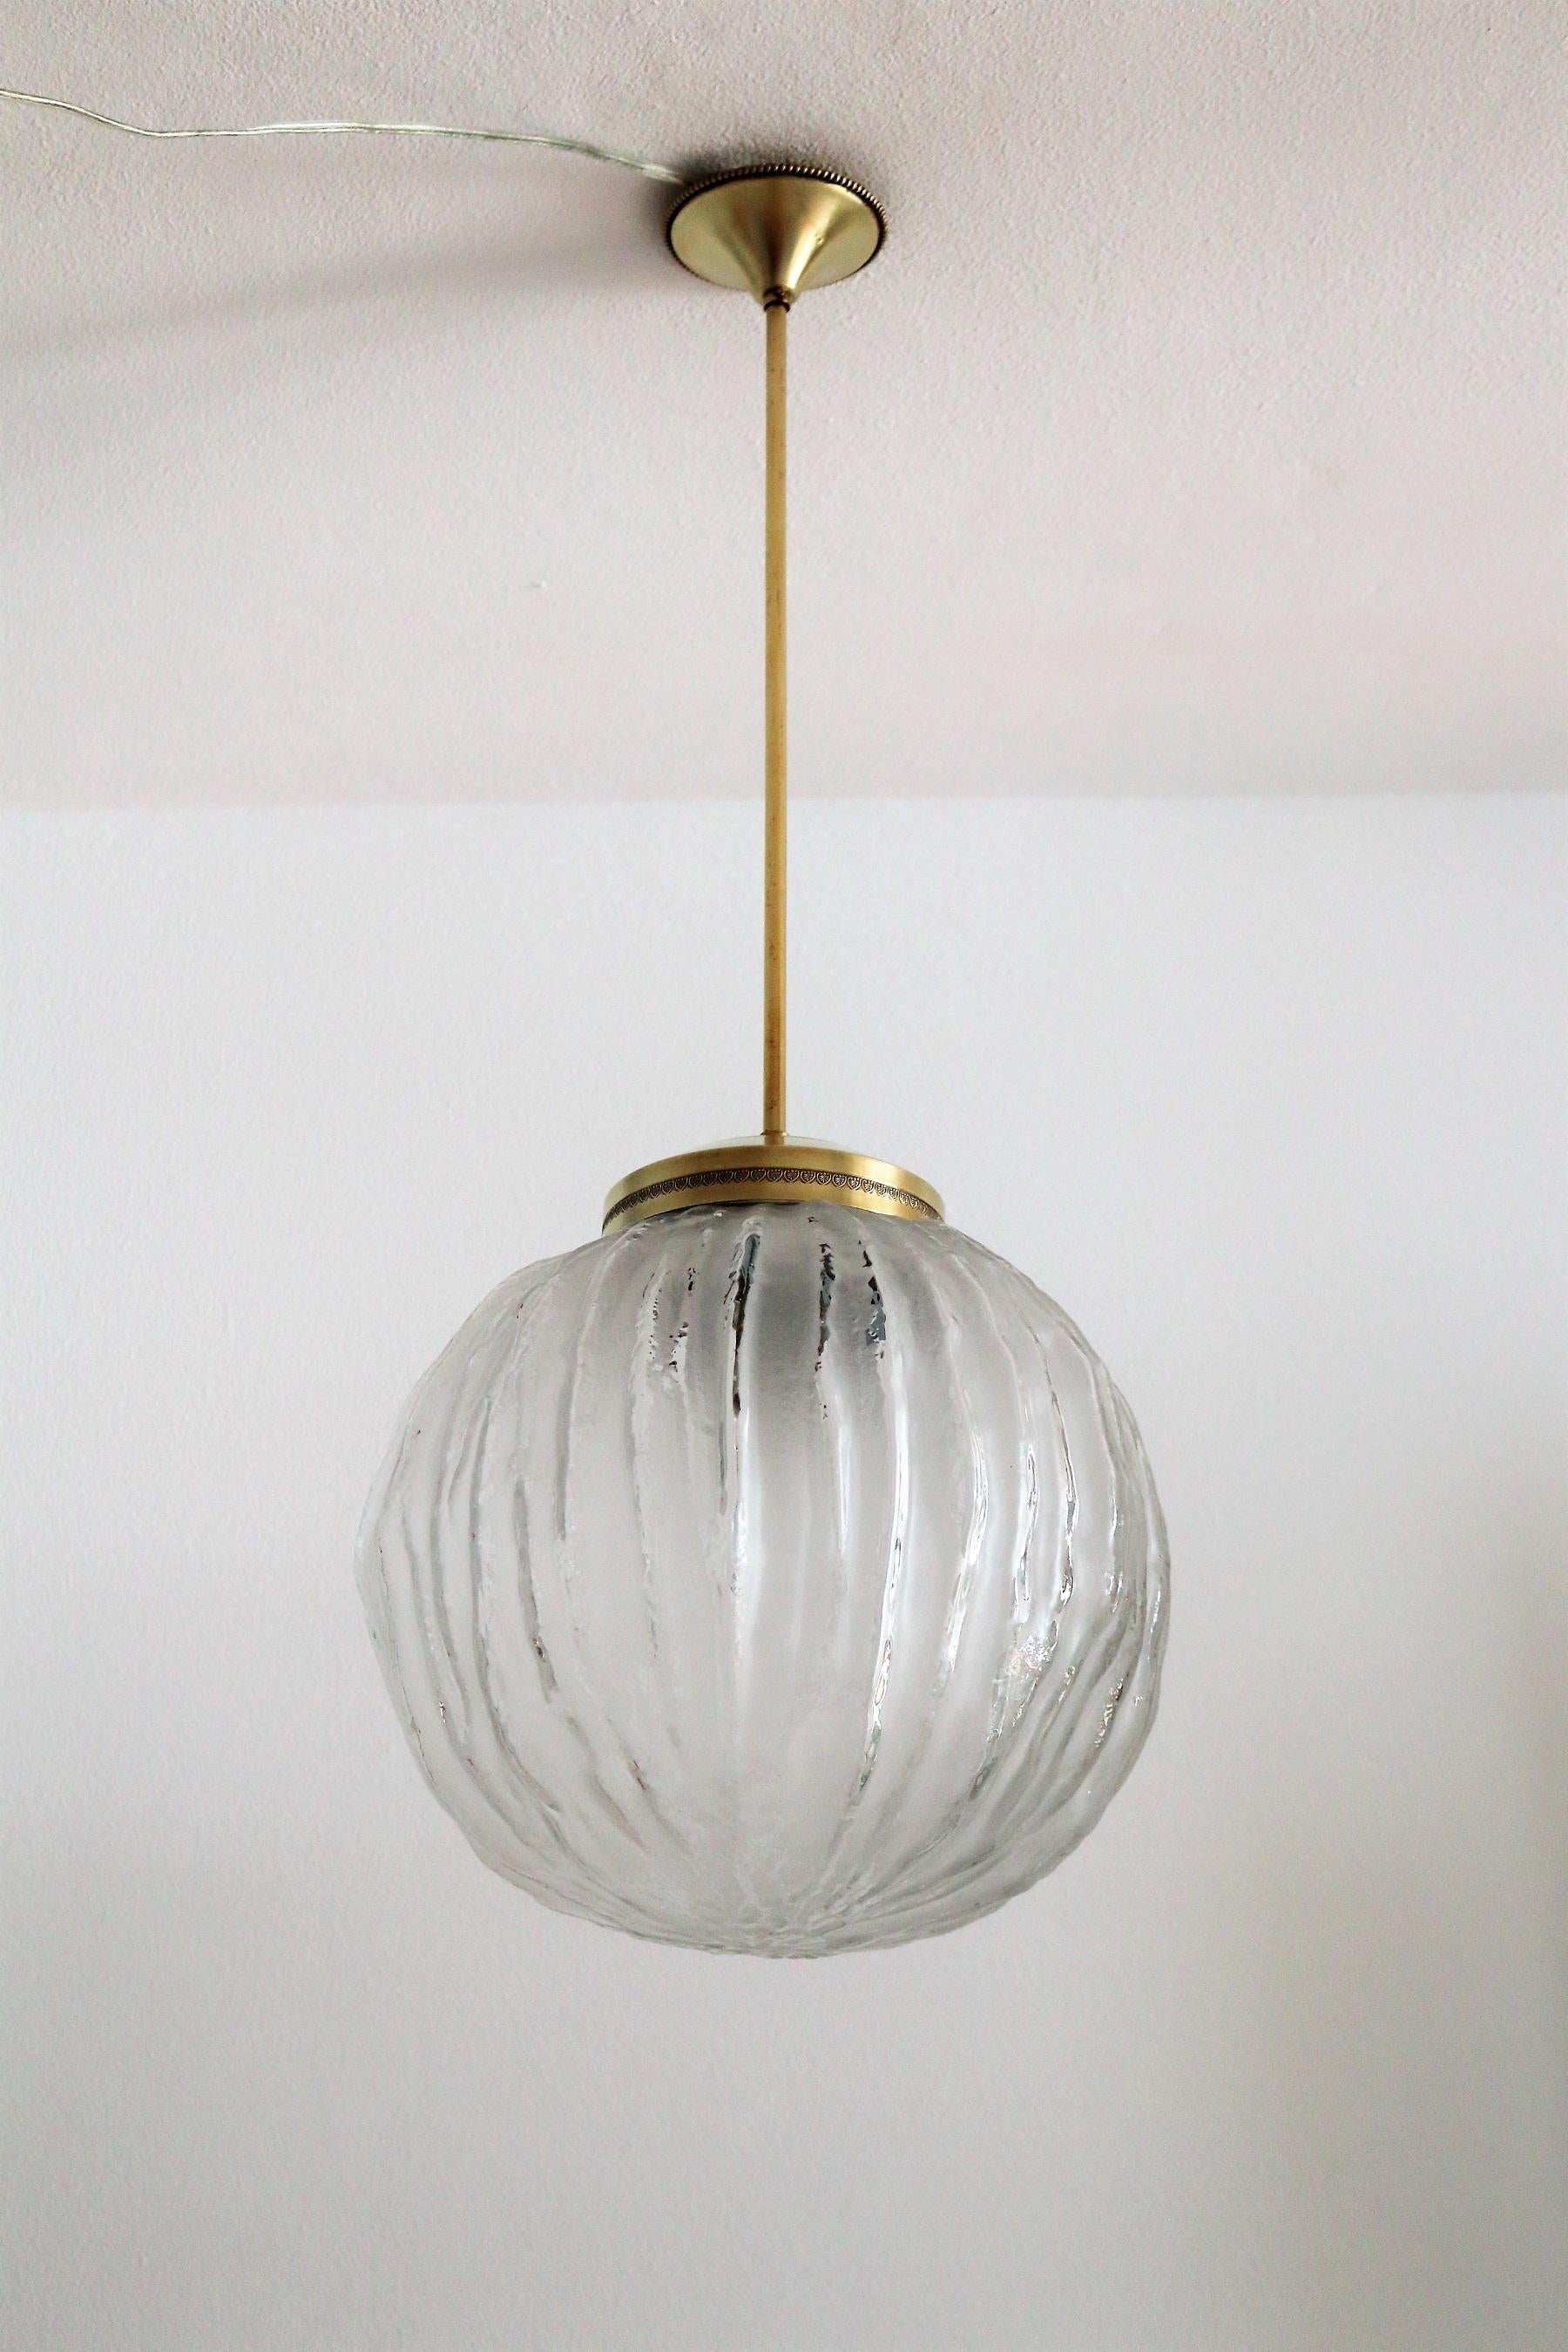 Beautiful Italian midcentury chandelier with particular Murano art glass and brass details.
The glass globe has an irregular, organic shape with satinated and shiny glass parts.
Leaves nice shadows on near wall and ceiling.
The same glass have